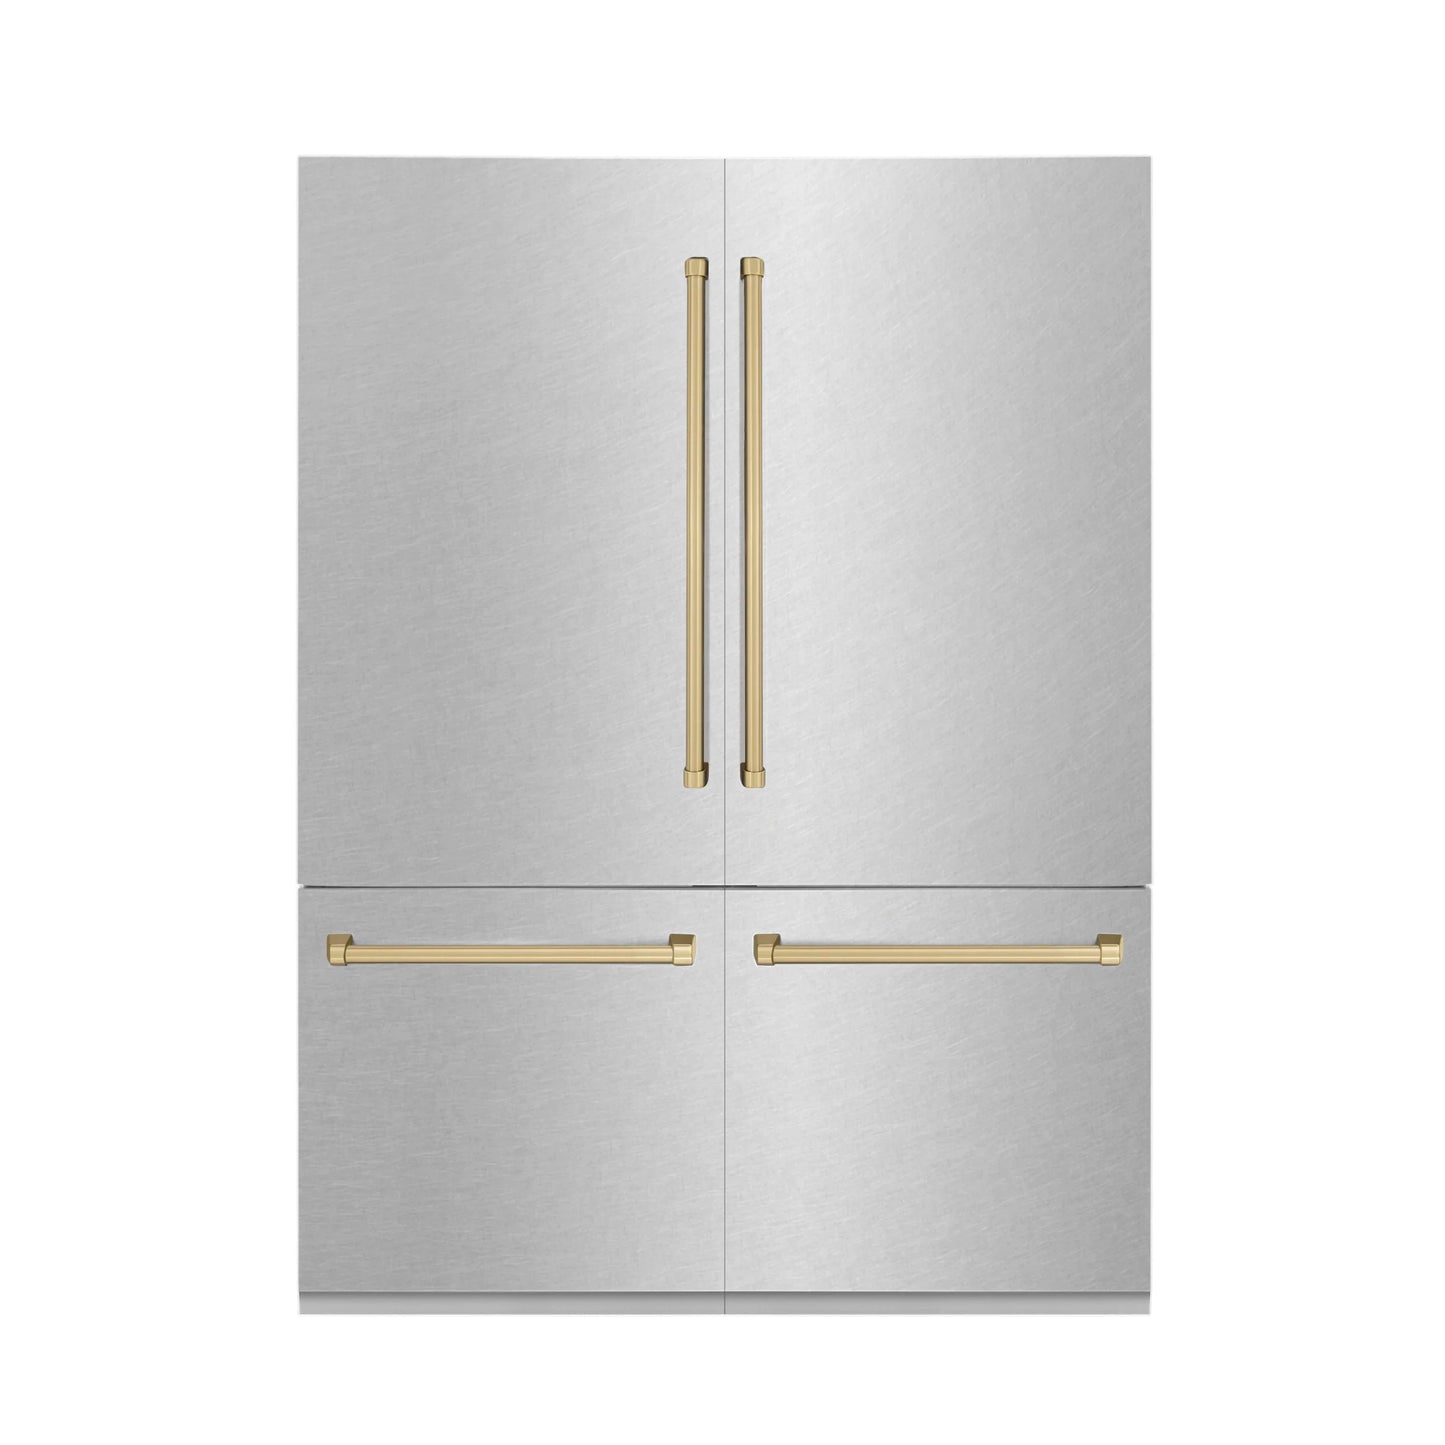 ZLINE 60" Autograph Refrigerator with Internal Water & Ice Dispenser in Fingerprint Resistant Stainless Steel with Bronze Accents